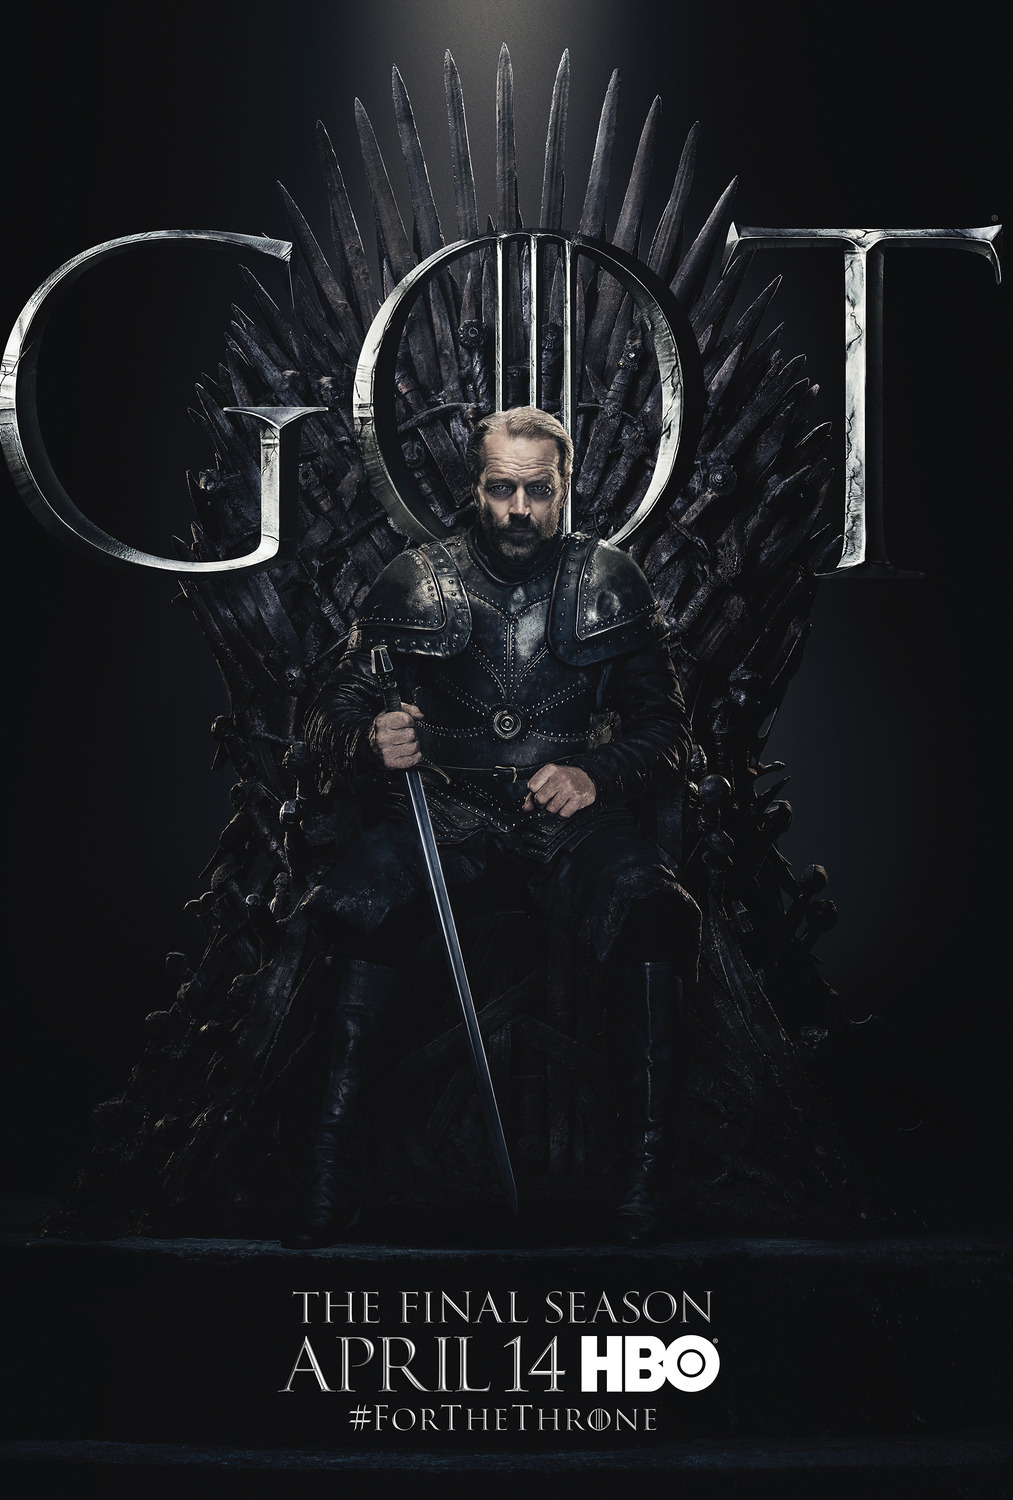 Extra Large Movie Poster Image for Game of Thrones (#120 of 125)